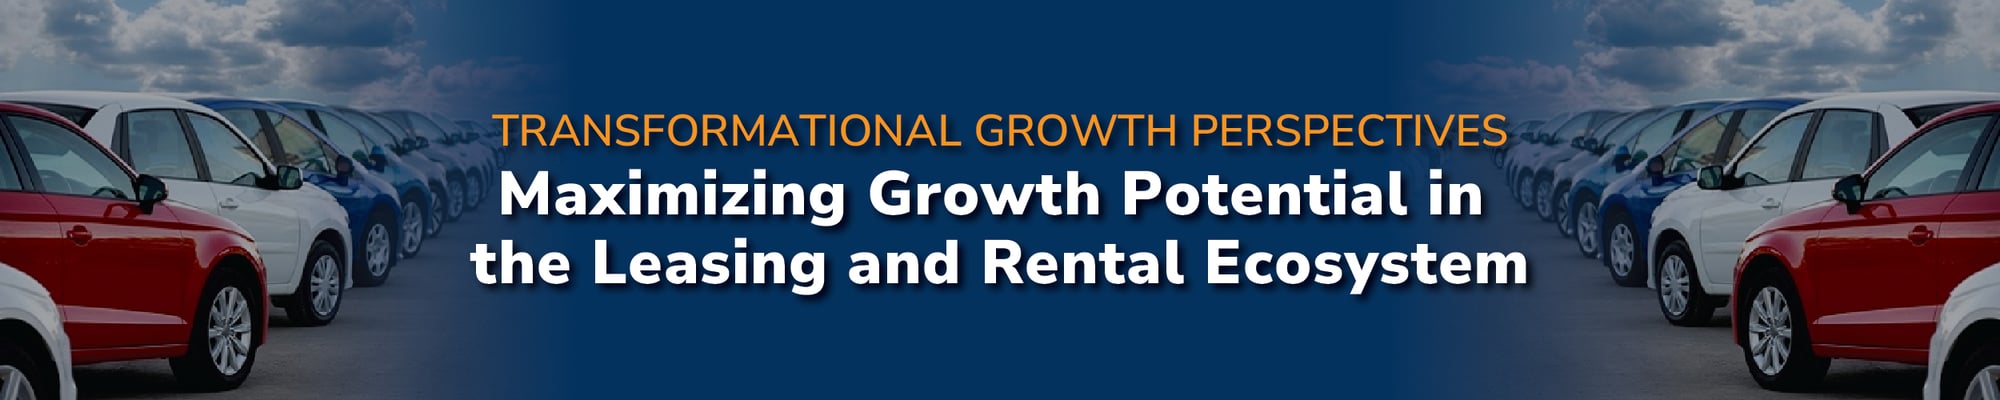 Maximizing Growth Potential in the Leasing and Rental Ecosystem